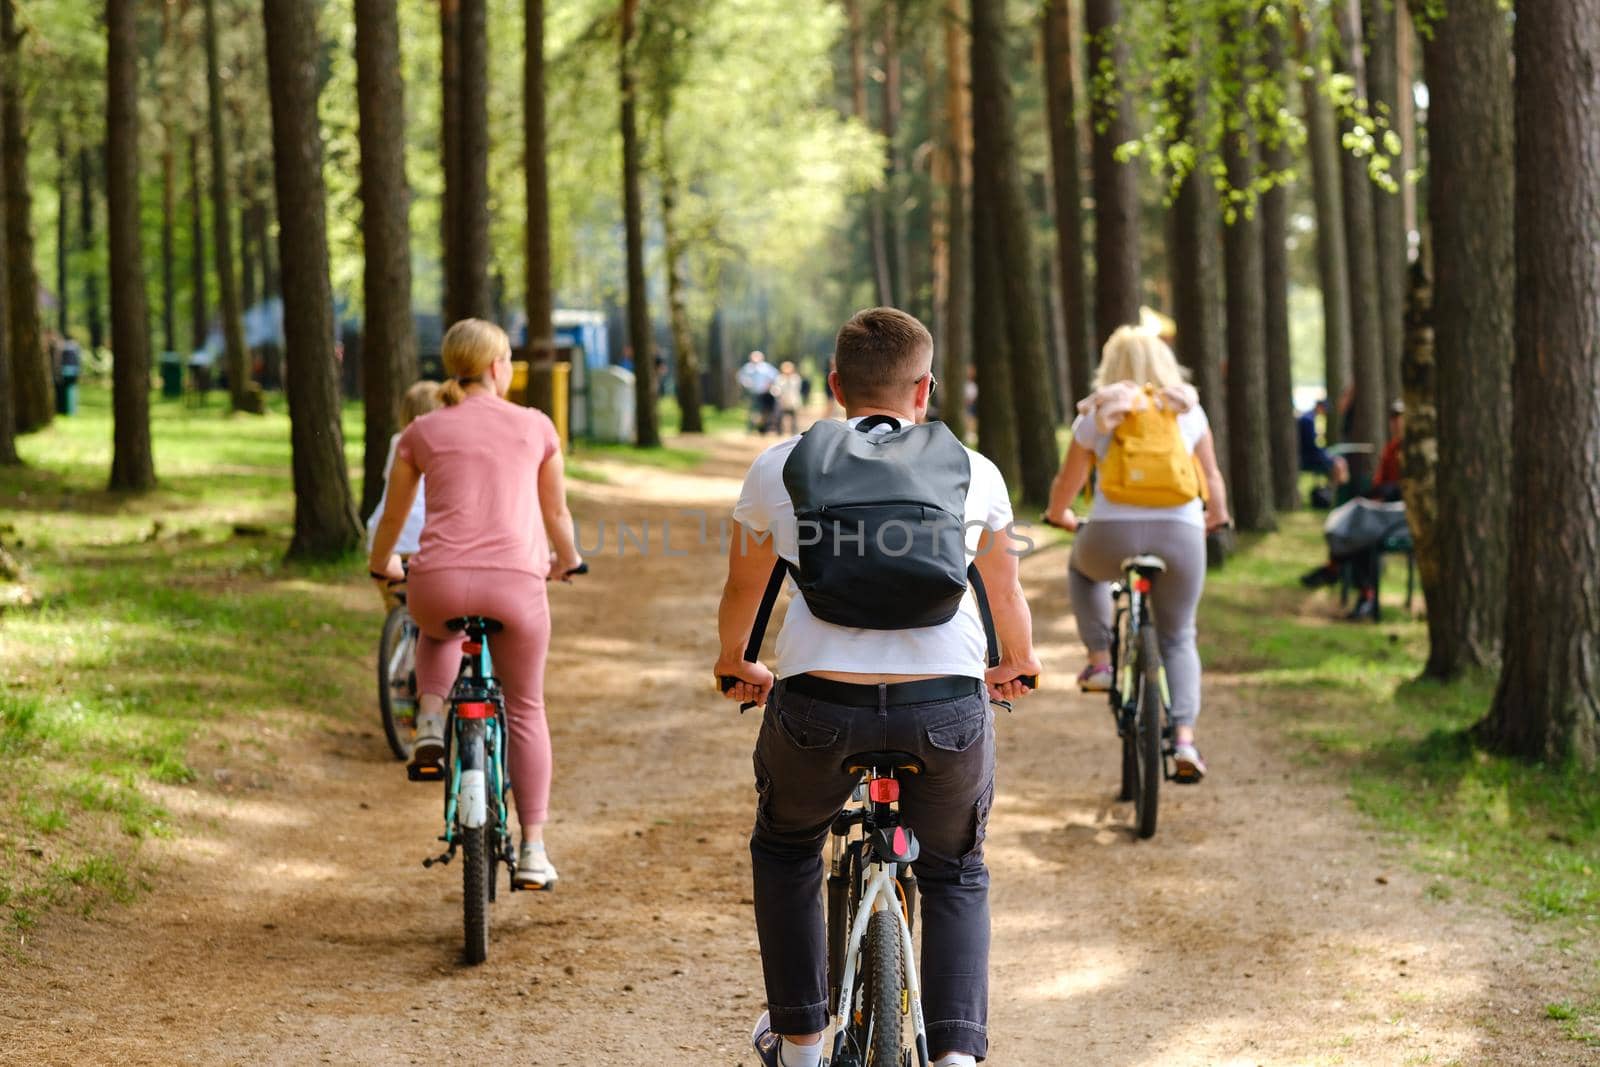 A group of cyclists with backpacks ride bicycles on a forest road enjoying nature by Lobachad